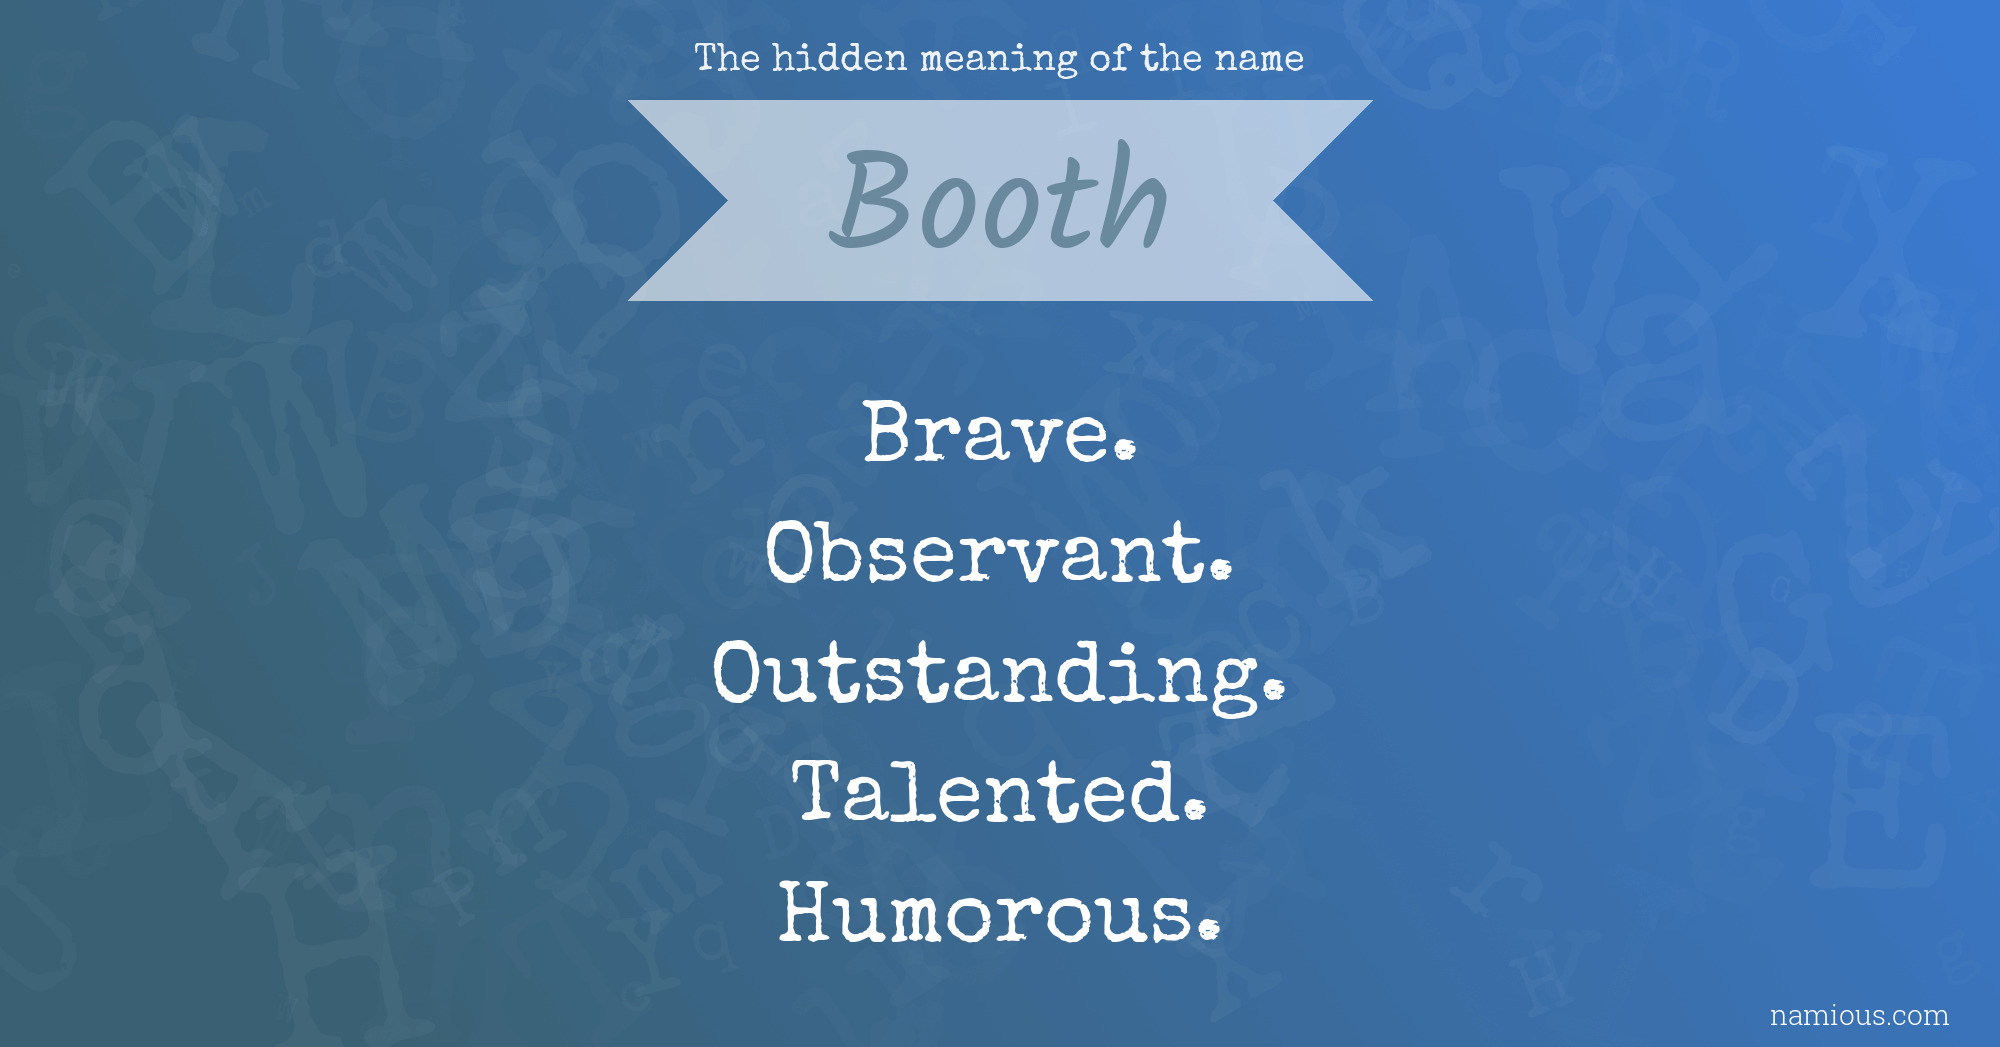 Booth Name Meaning